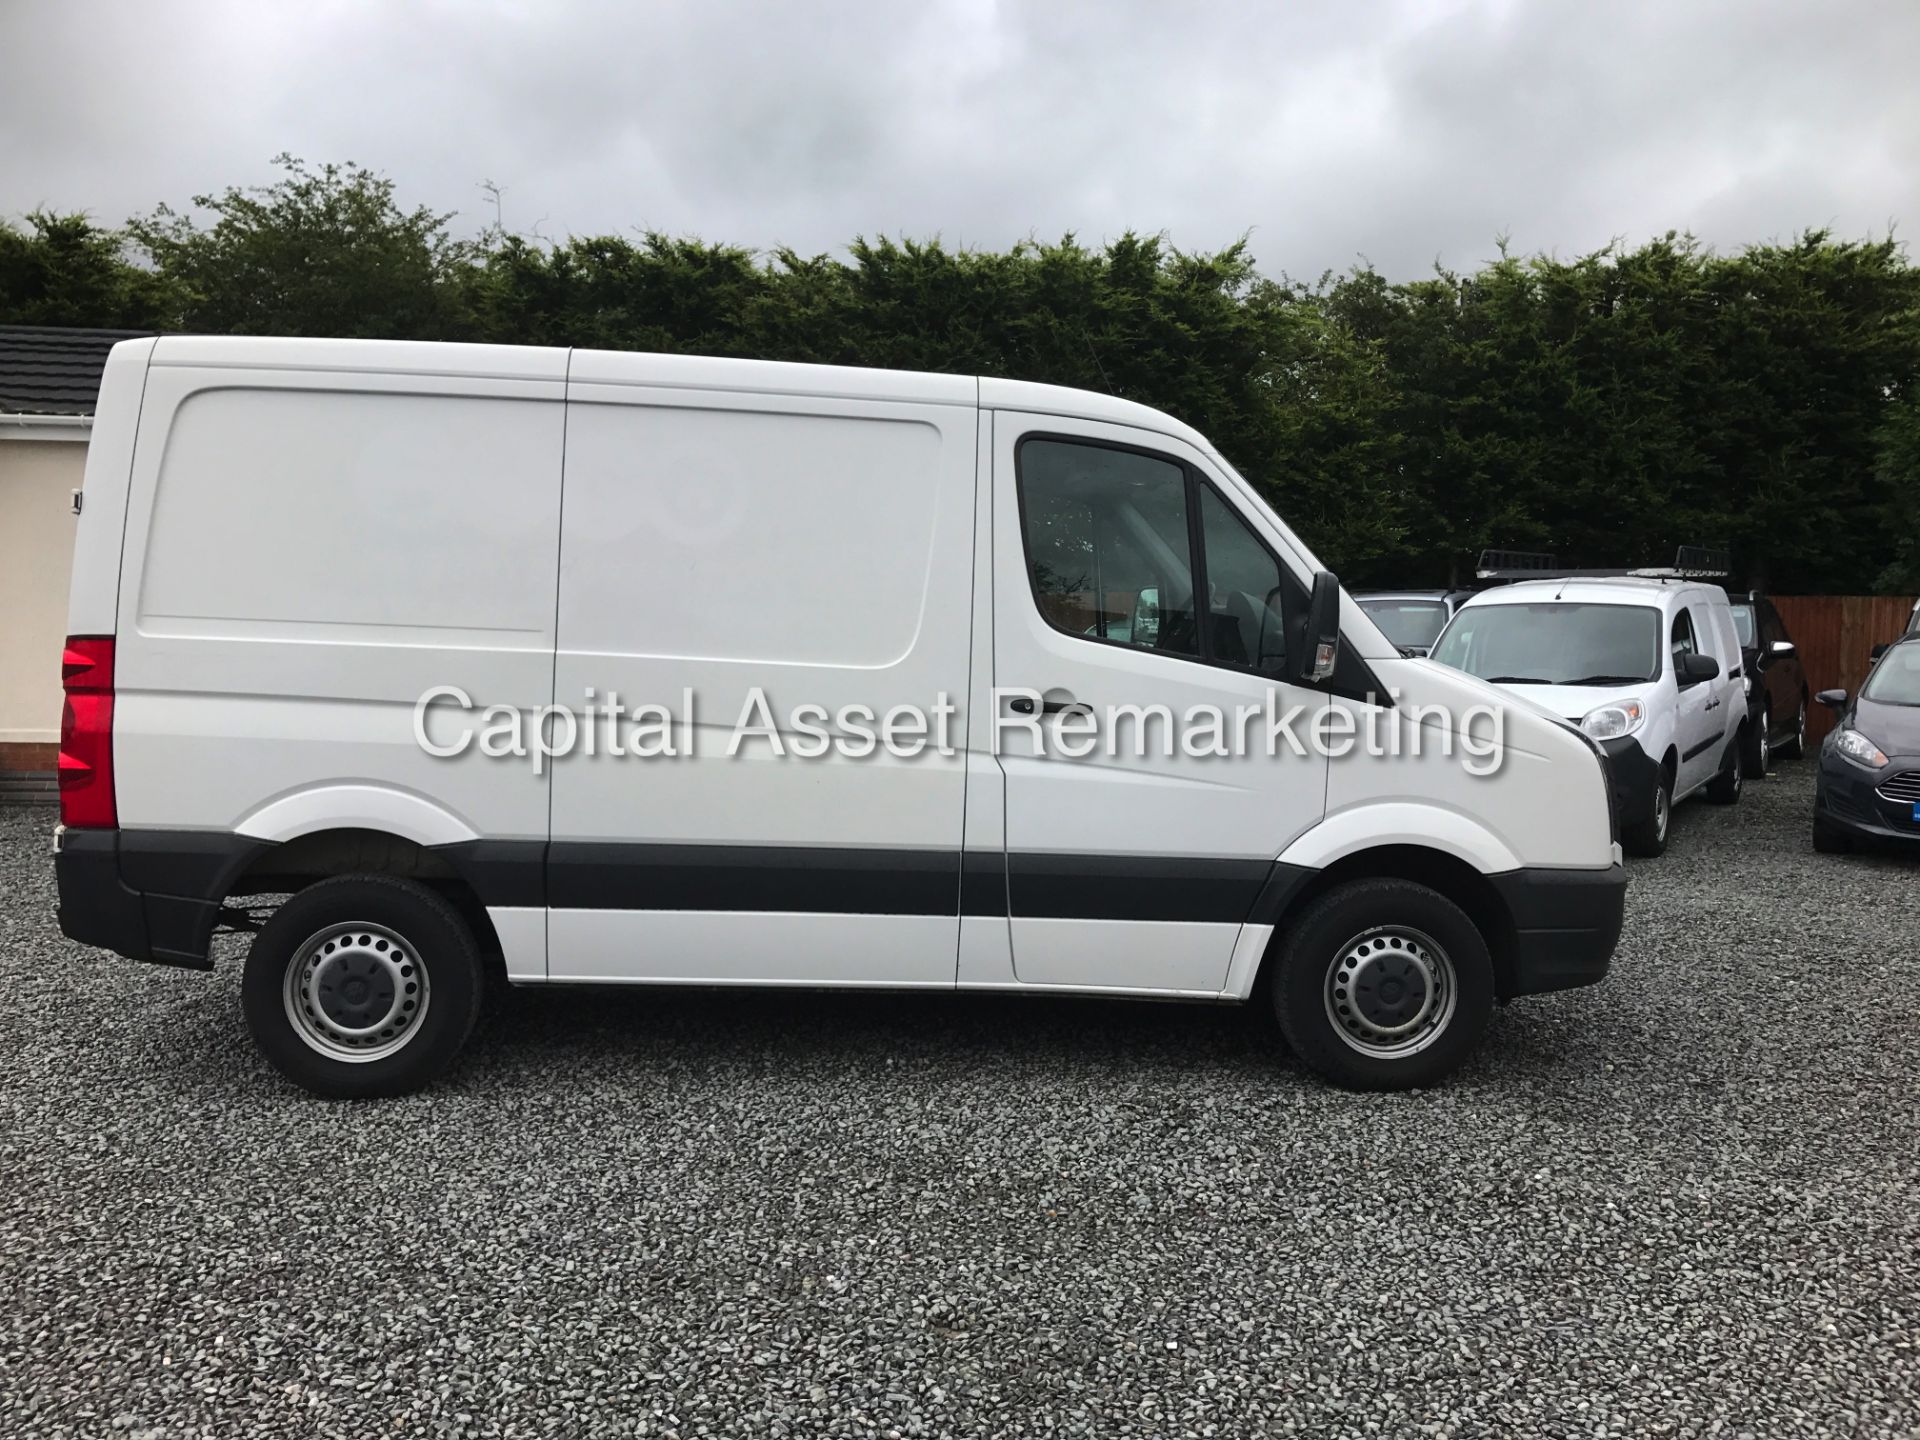 VOLKSWAGEN CRAFTER CR30 SWB 2.0TDI (109) - NEW SHAPE - 14 REG - MASSIVE SPEC - AIR CON!! - 1 OWNER! - Image 4 of 13